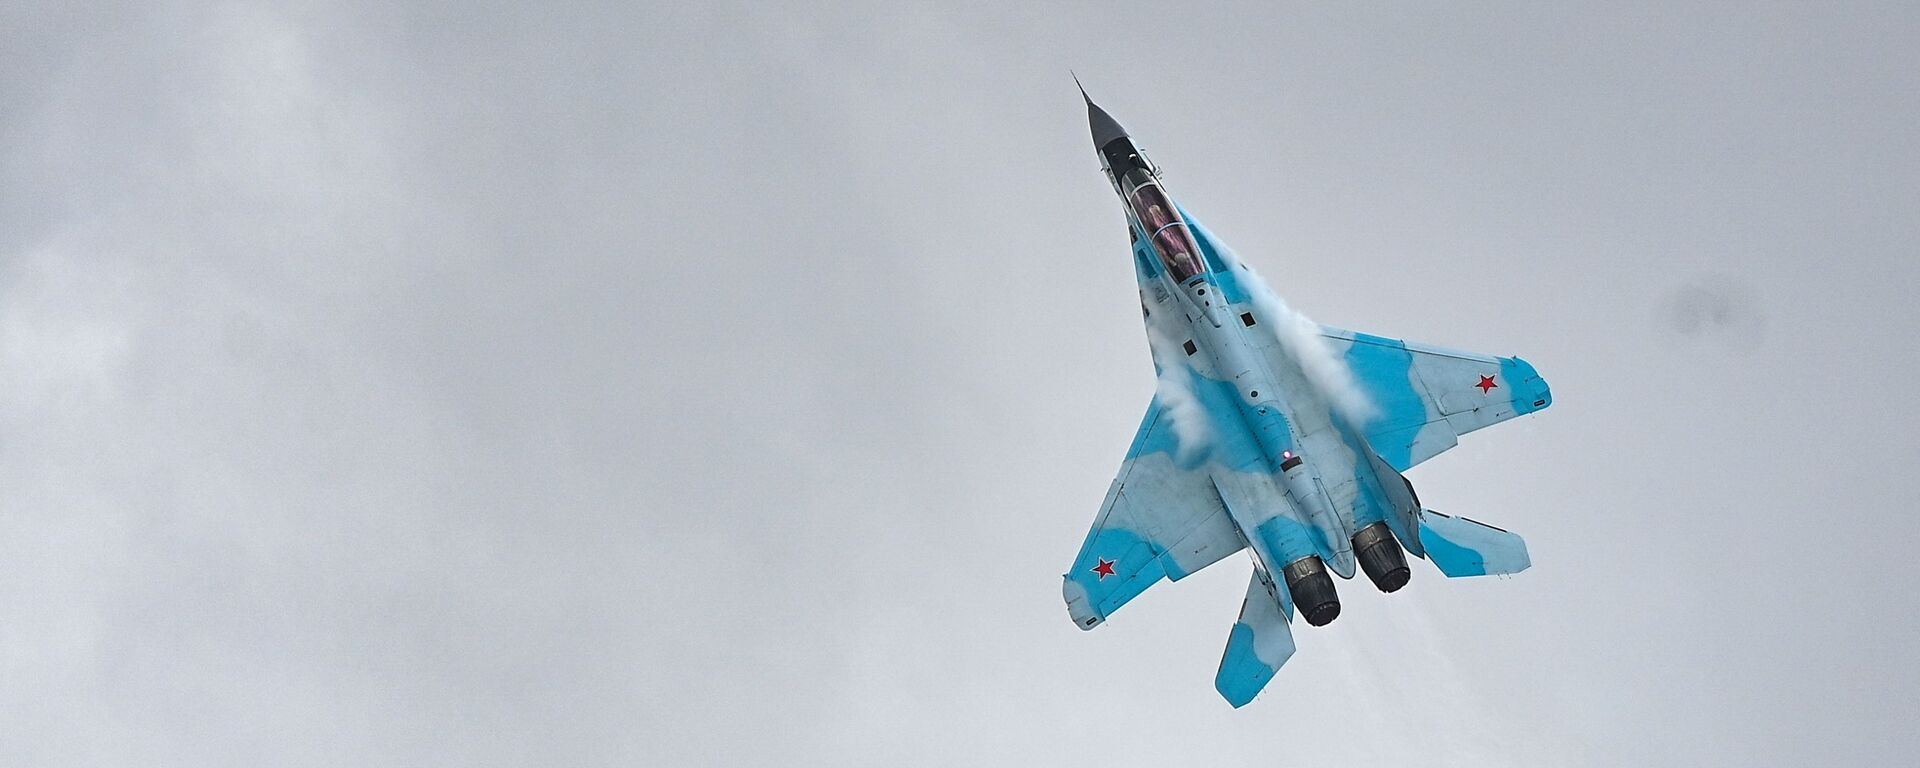 Upgraded Russian fourth-generation jet Su-35 NATO reporting names: Flanker-E) during MAKS-2021 air show - Sputnik International, 1920, 24.09.2022